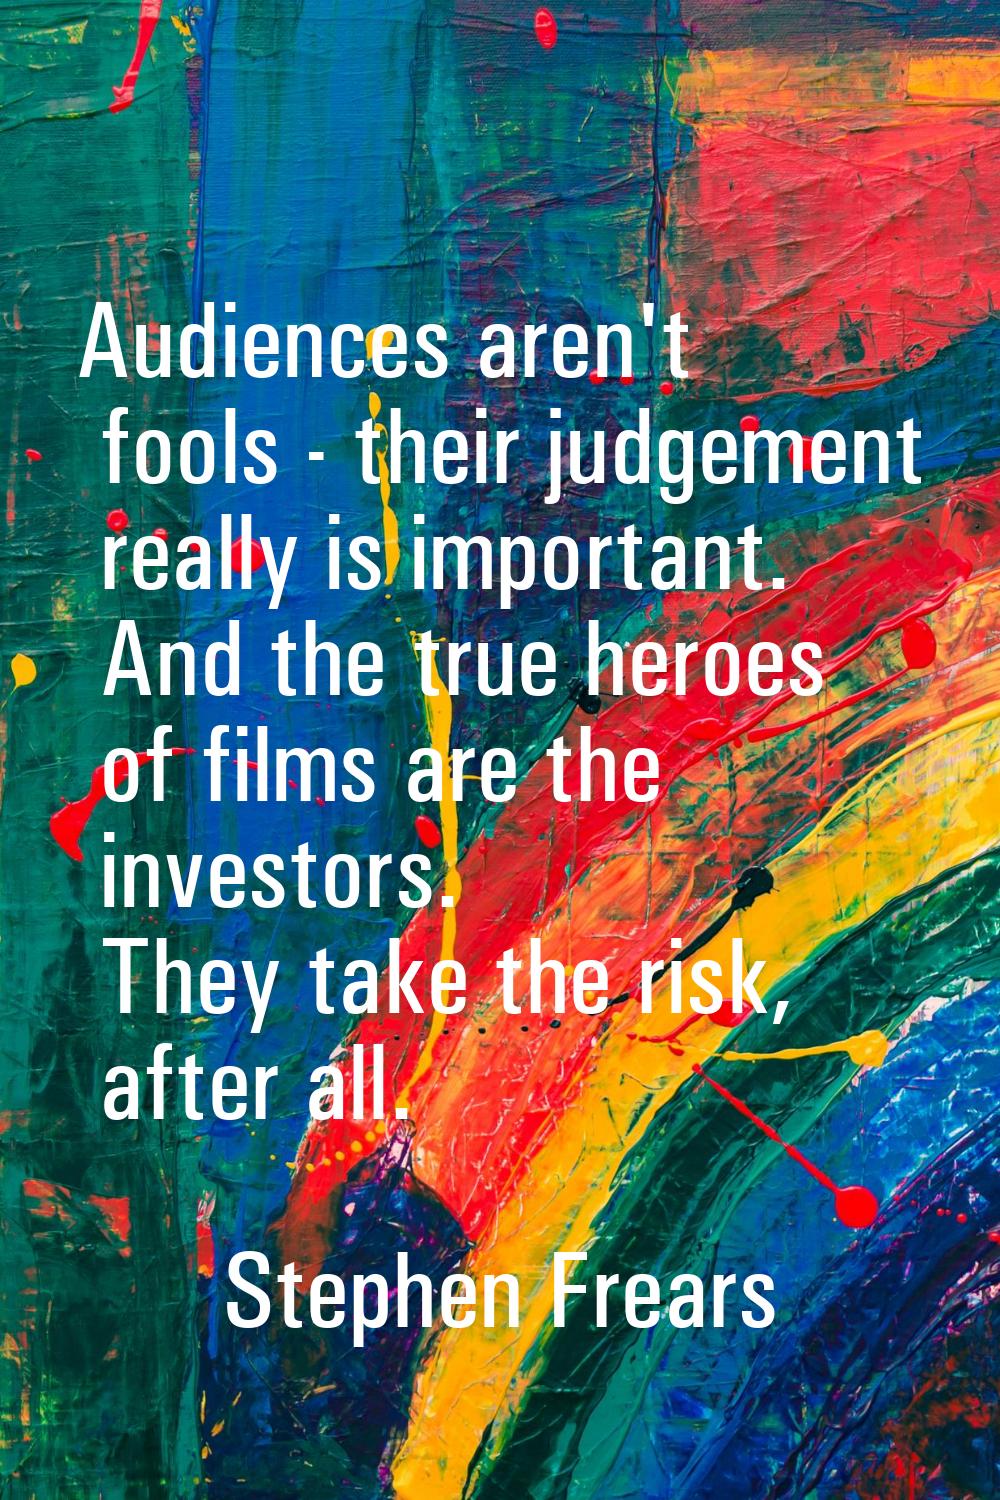 Audiences aren't fools - their judgement really is important. And the true heroes of films are the 